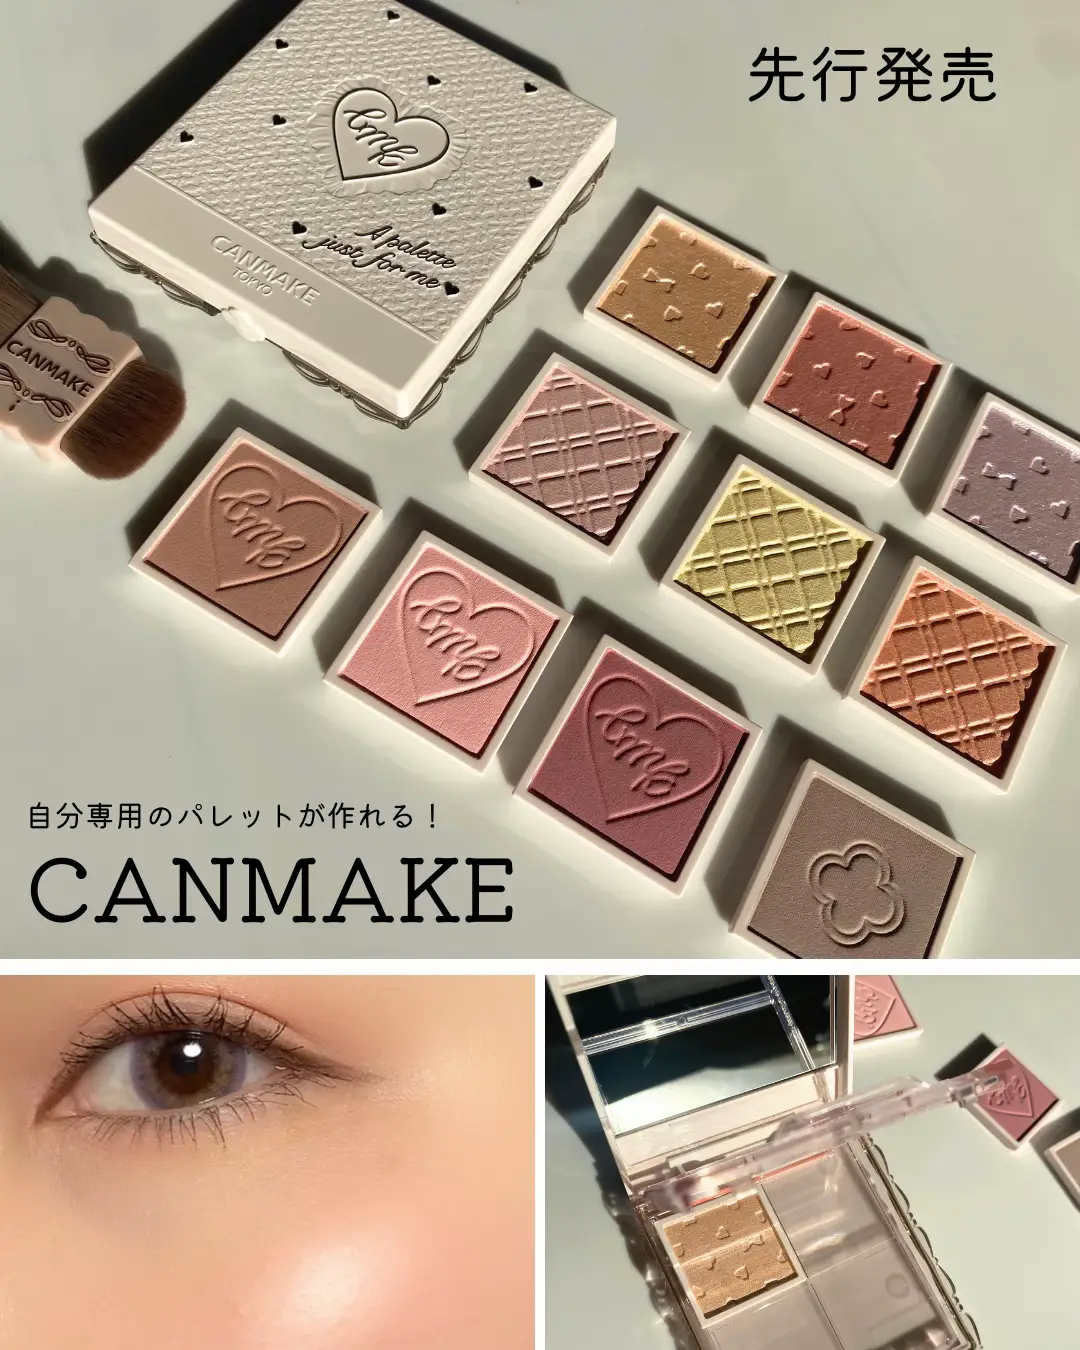 As expected of cuteness!] New work of CANMAKE, Custom Palette All